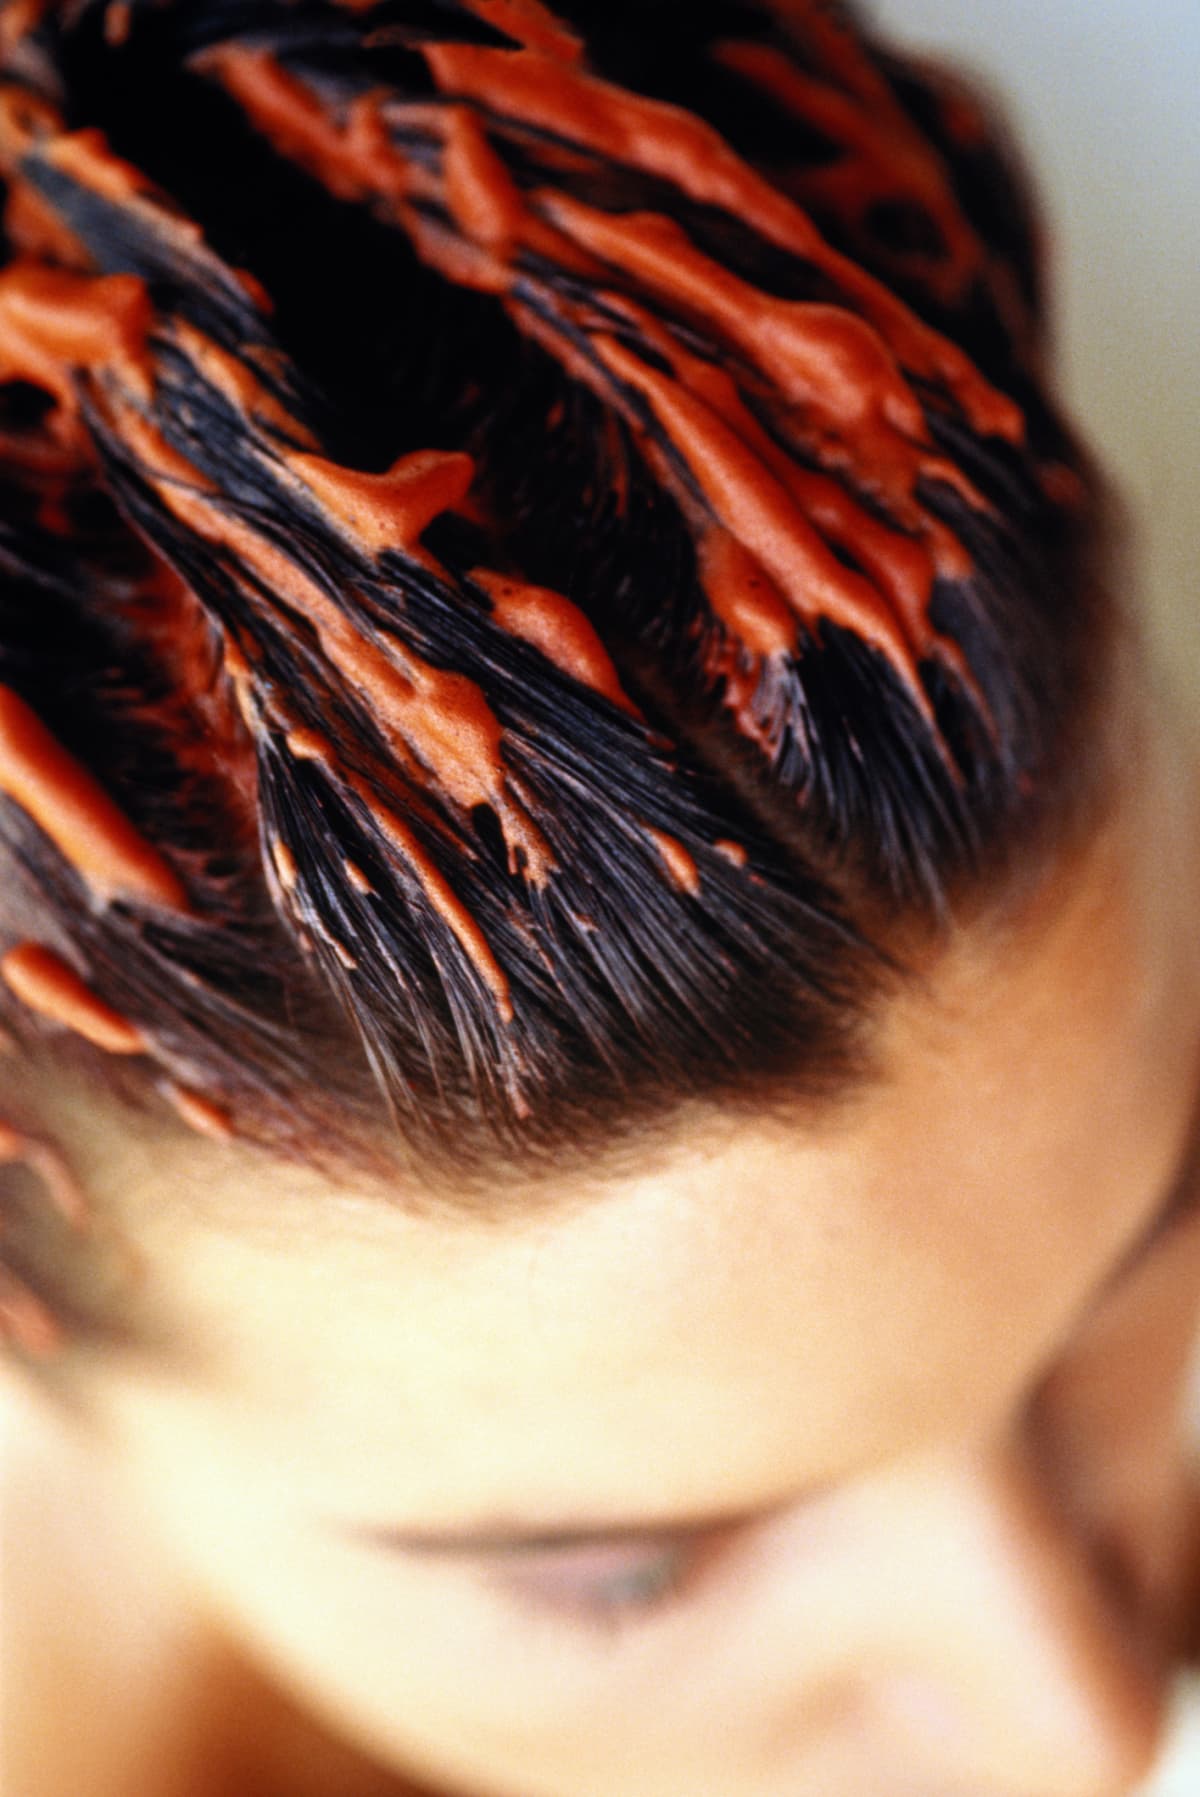 Woman with red hair dye in her hair